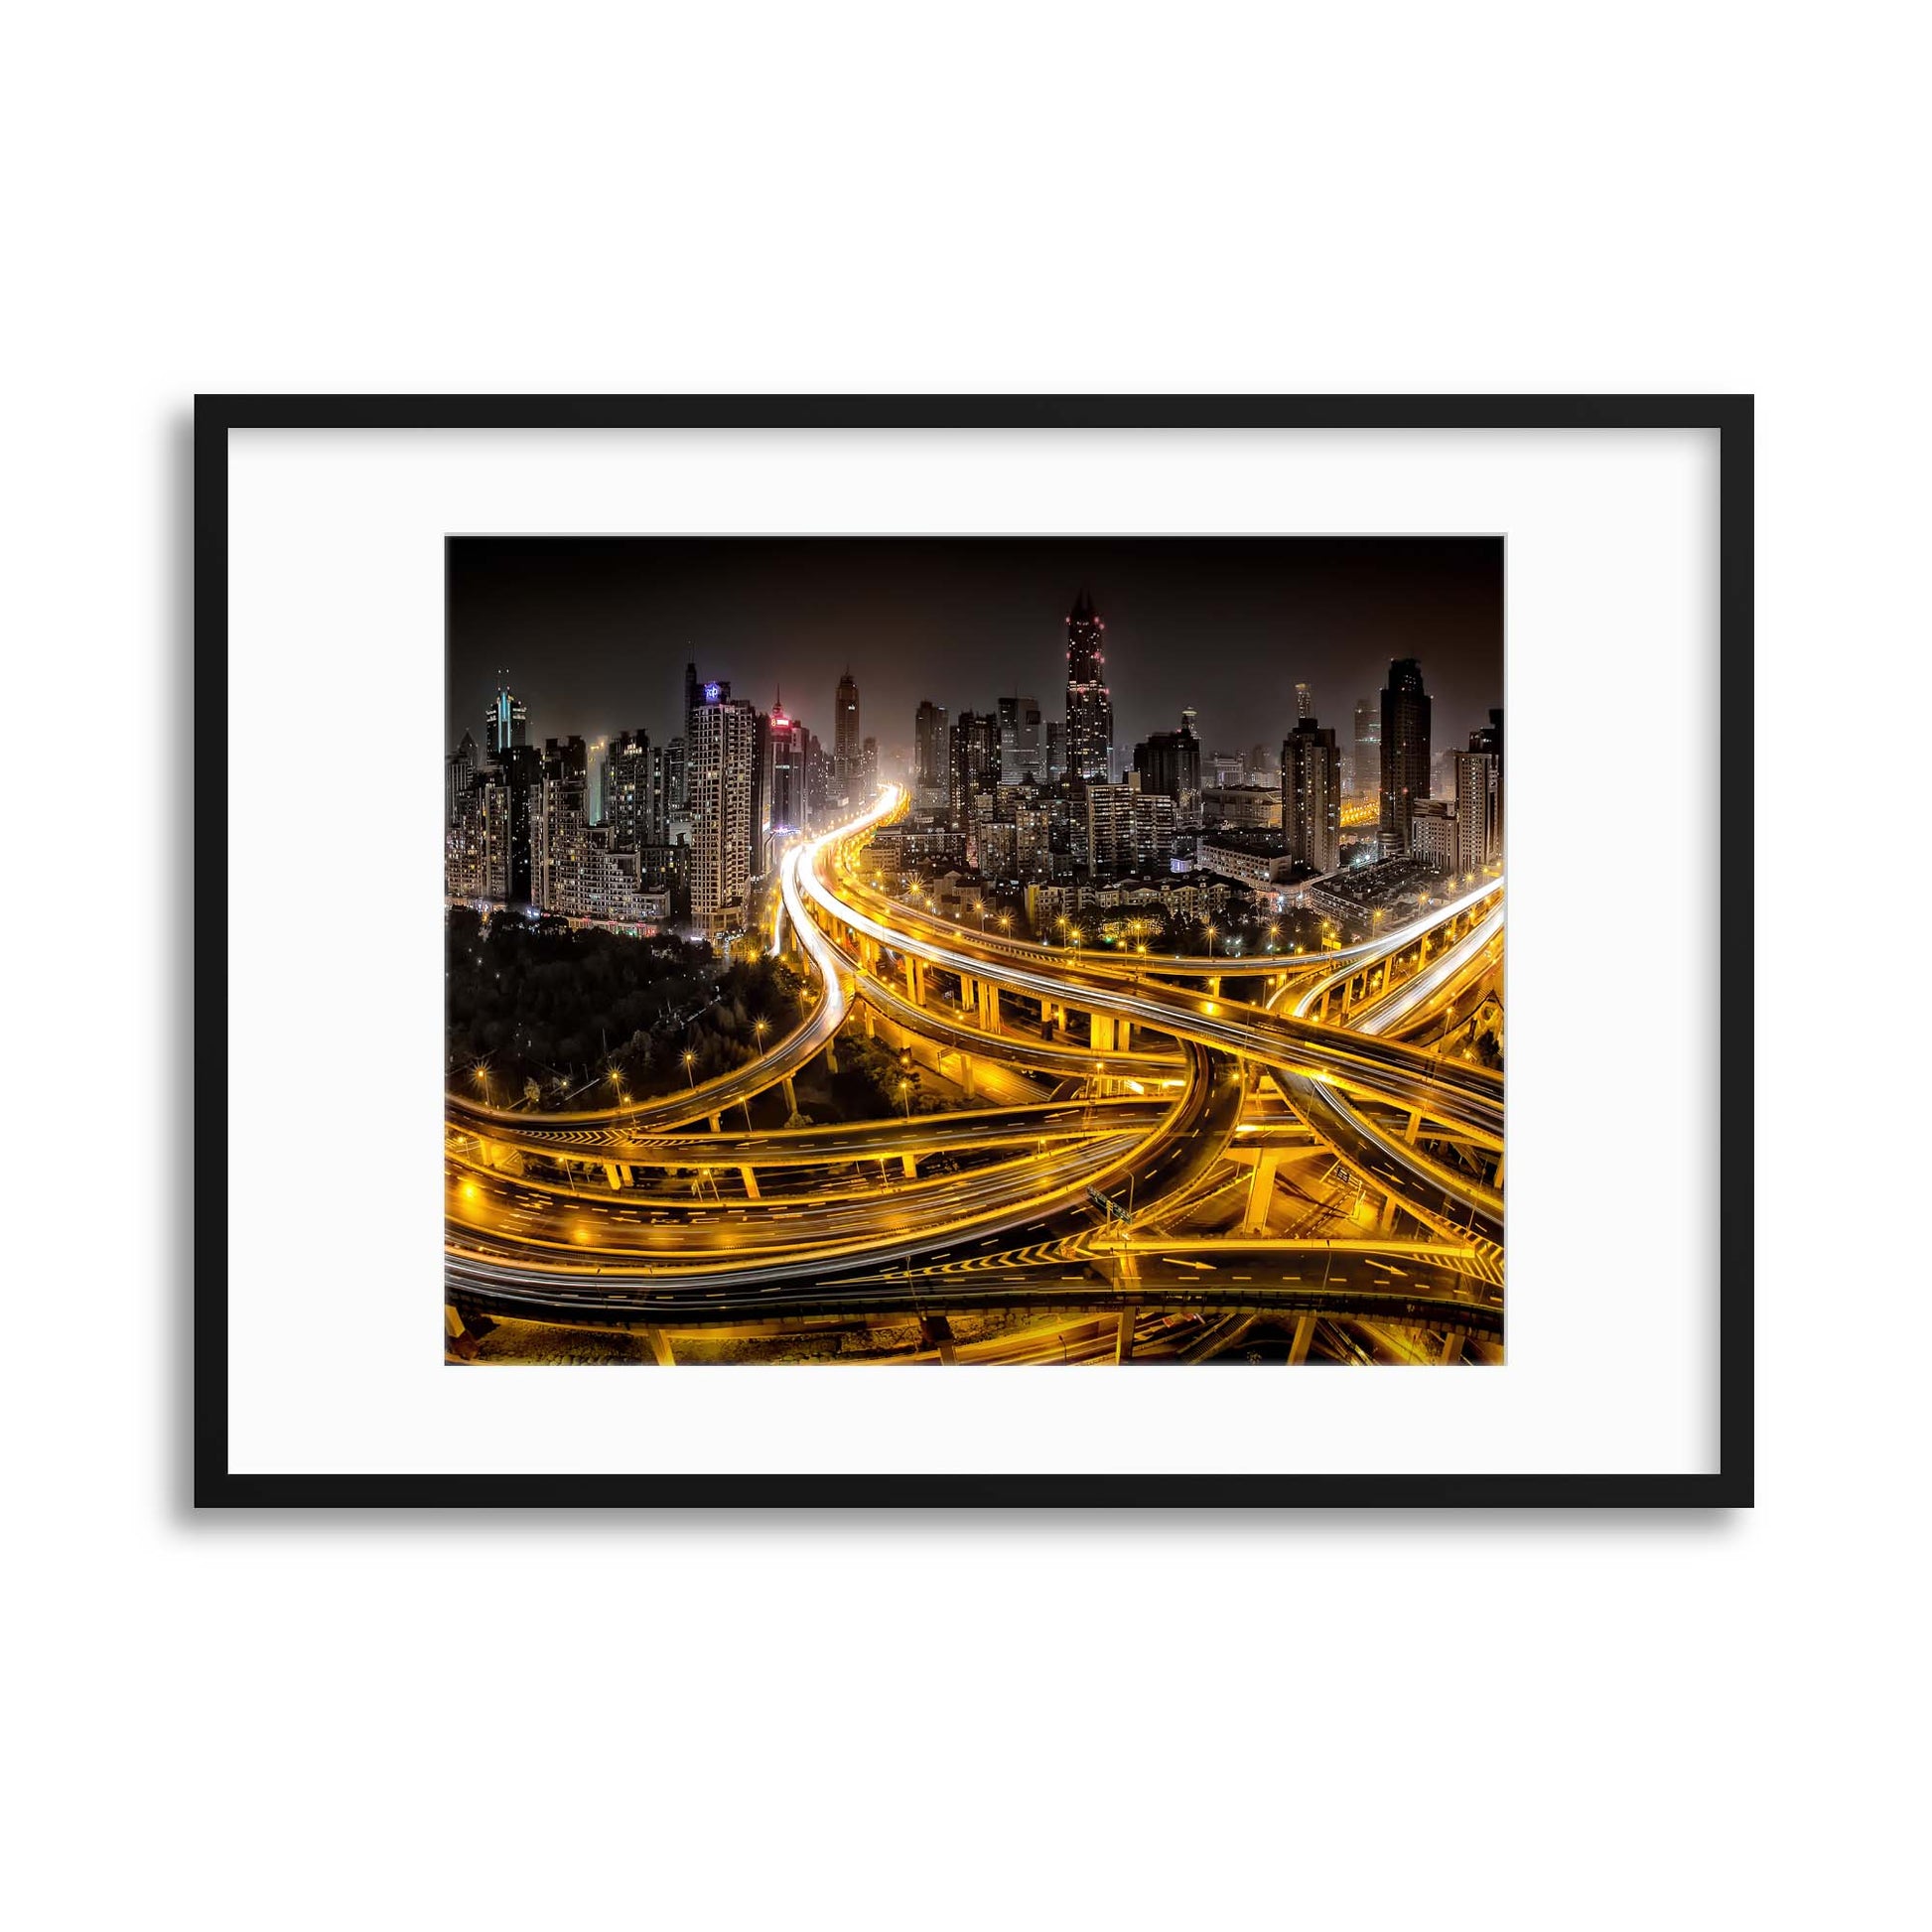 Shanghai at Night by Clemens Geiger Framed Print - USTAD HOME